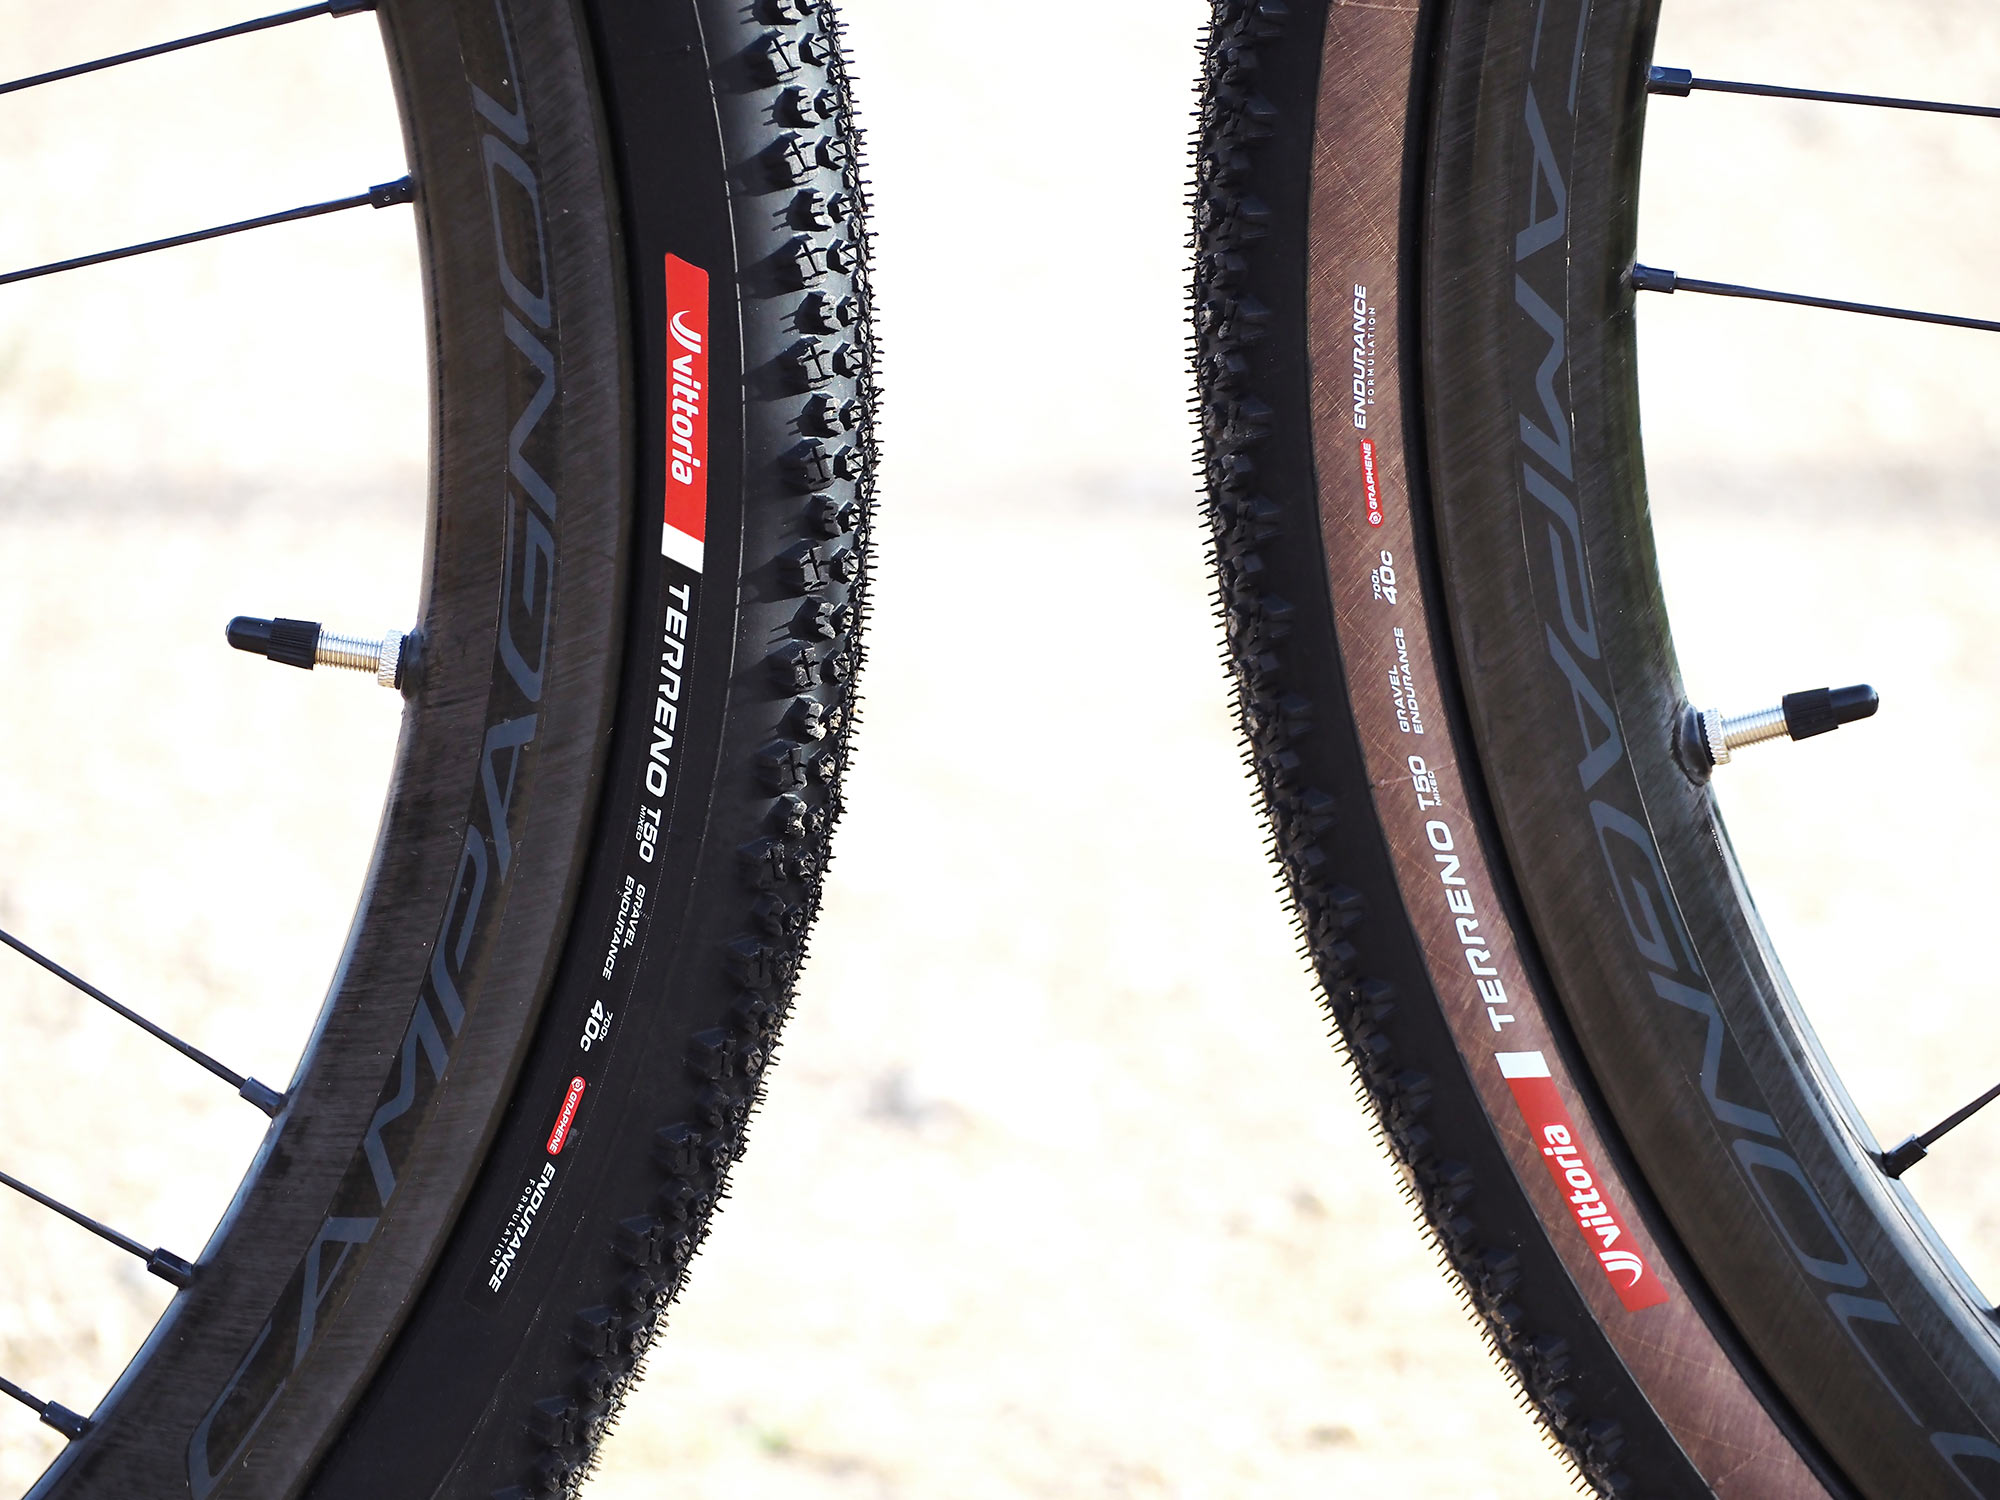 vittoria terreno mixed T50 gravel bike tires shown with black and brown sidewalls.